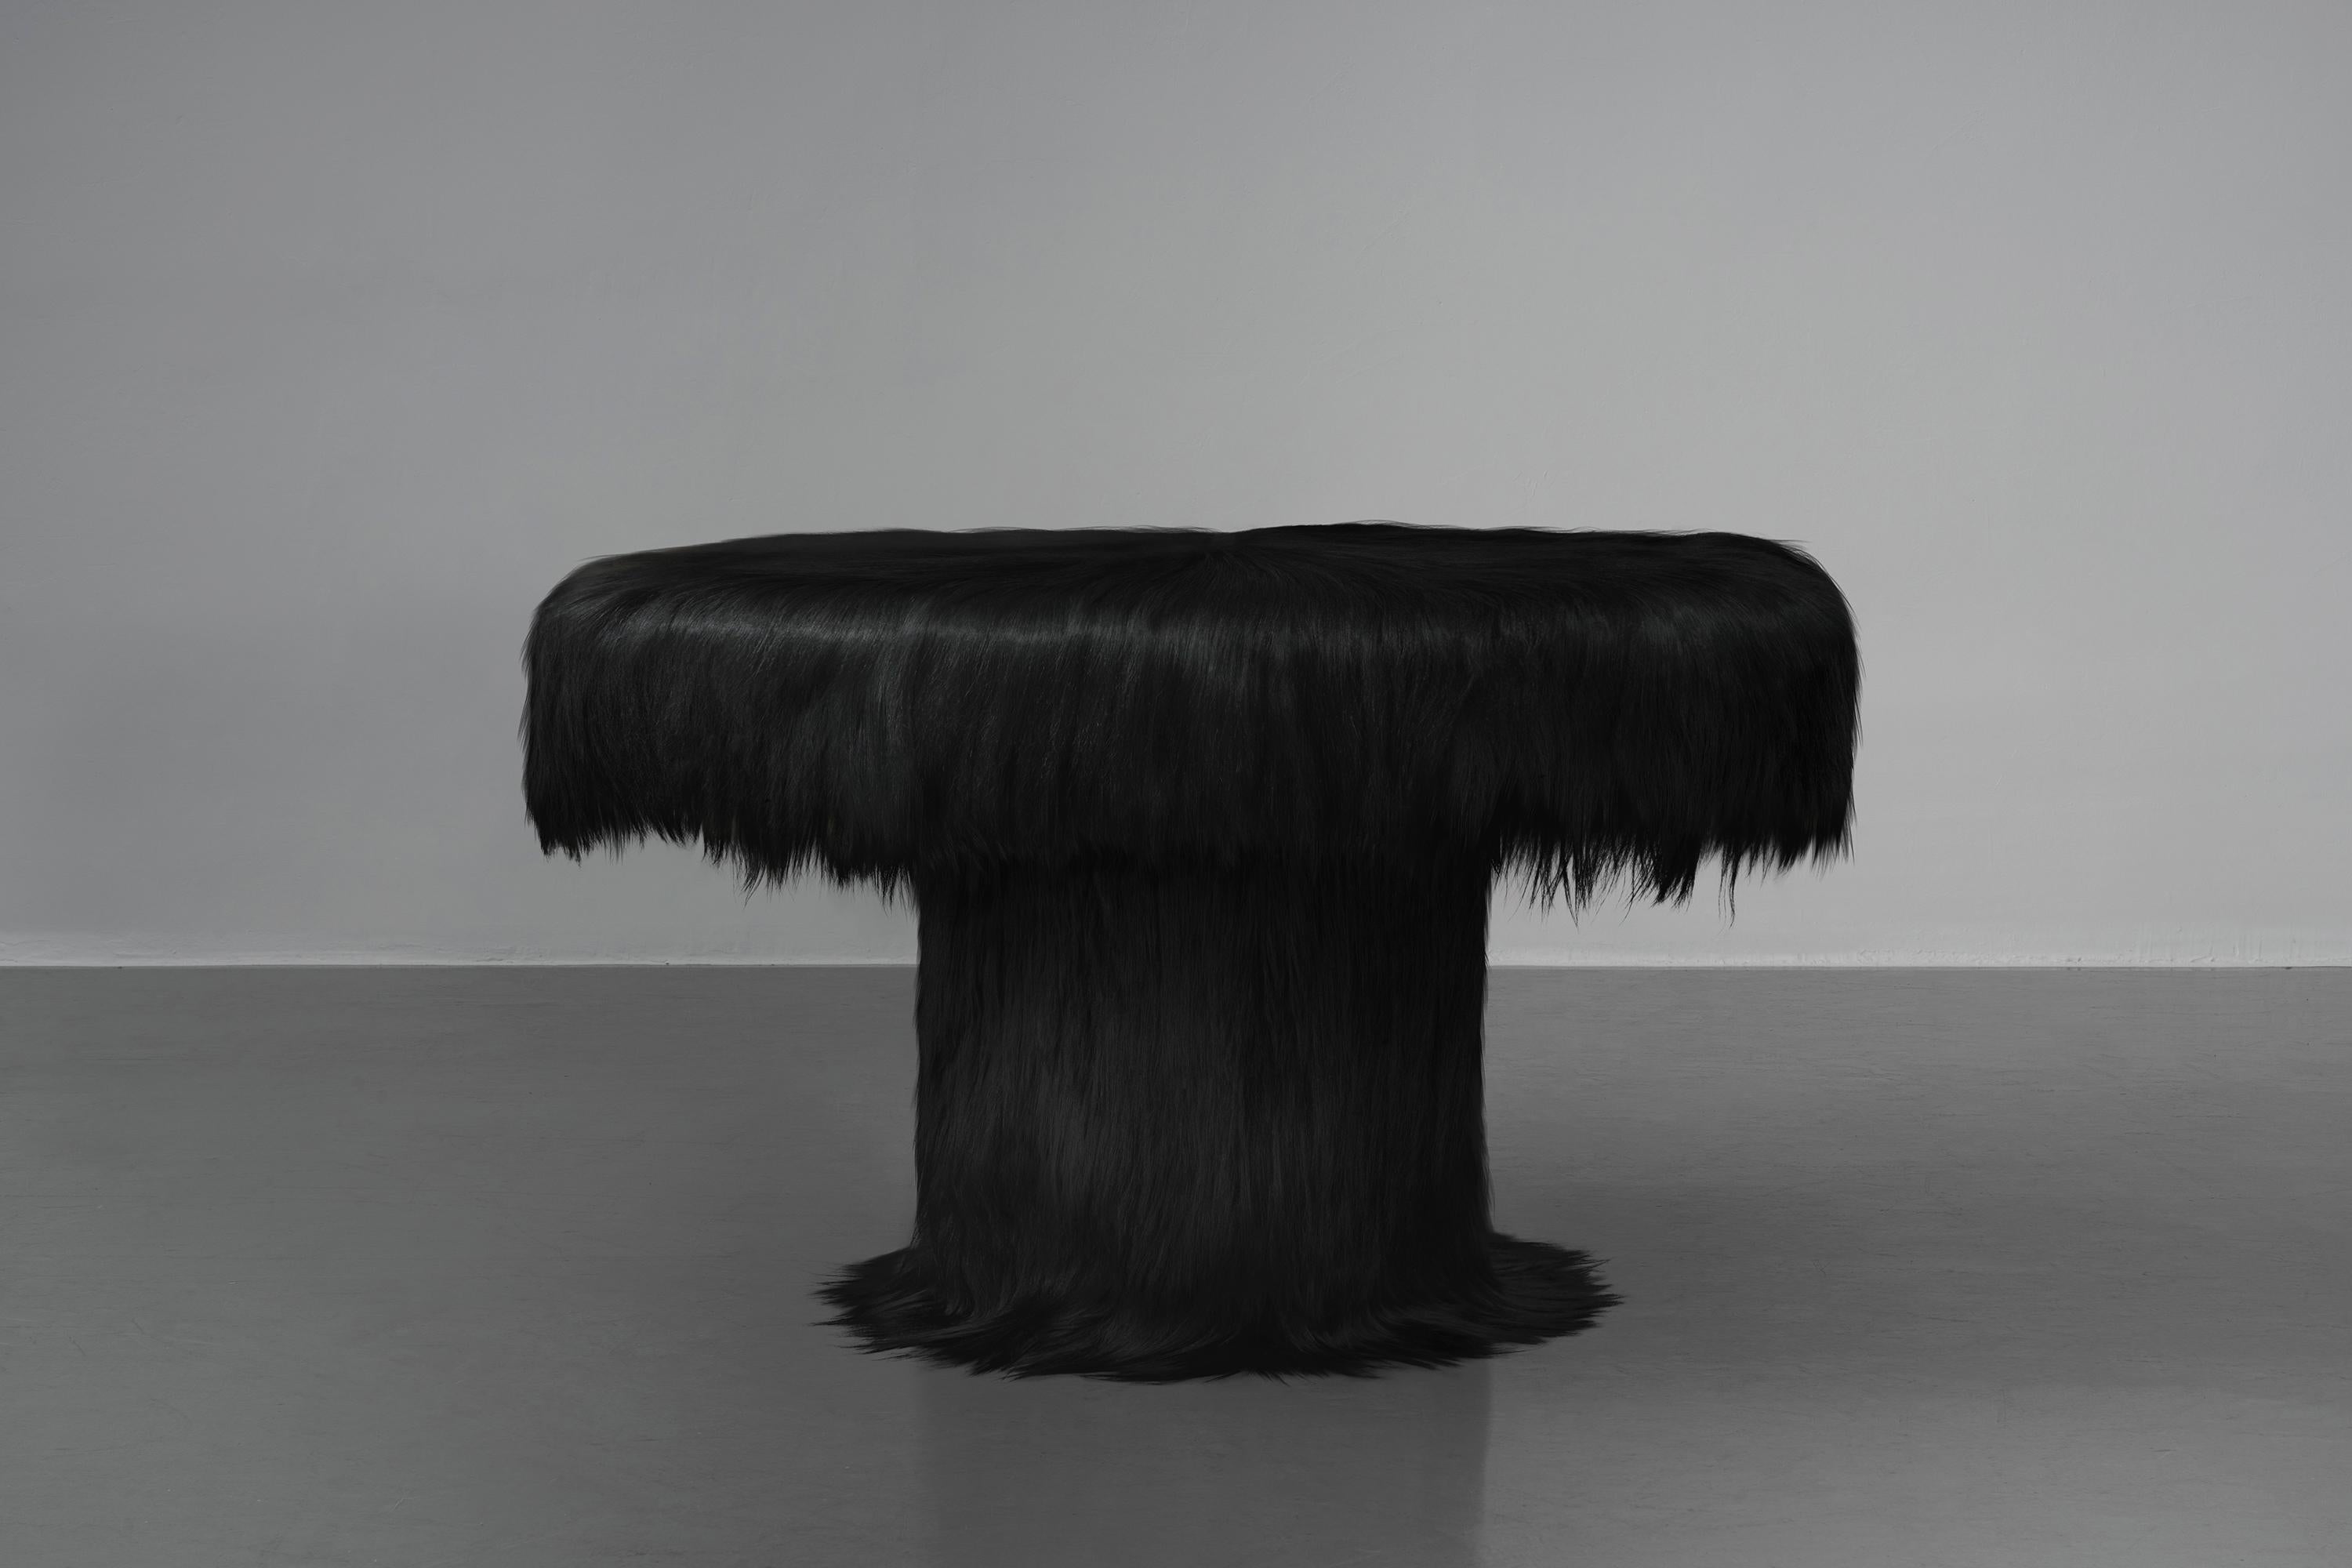 Raw Table by Atelier V&F
Limited Edition Of 5+2AP Pieces.
Dimensions: Ø 130 x H 76 cm.
Materials: Goatskin offcuts.

Inspired by the earth goddess Gaia,「Revelation of Gaia」aims to explore the mighty but soft inner power and to praise the mysterious